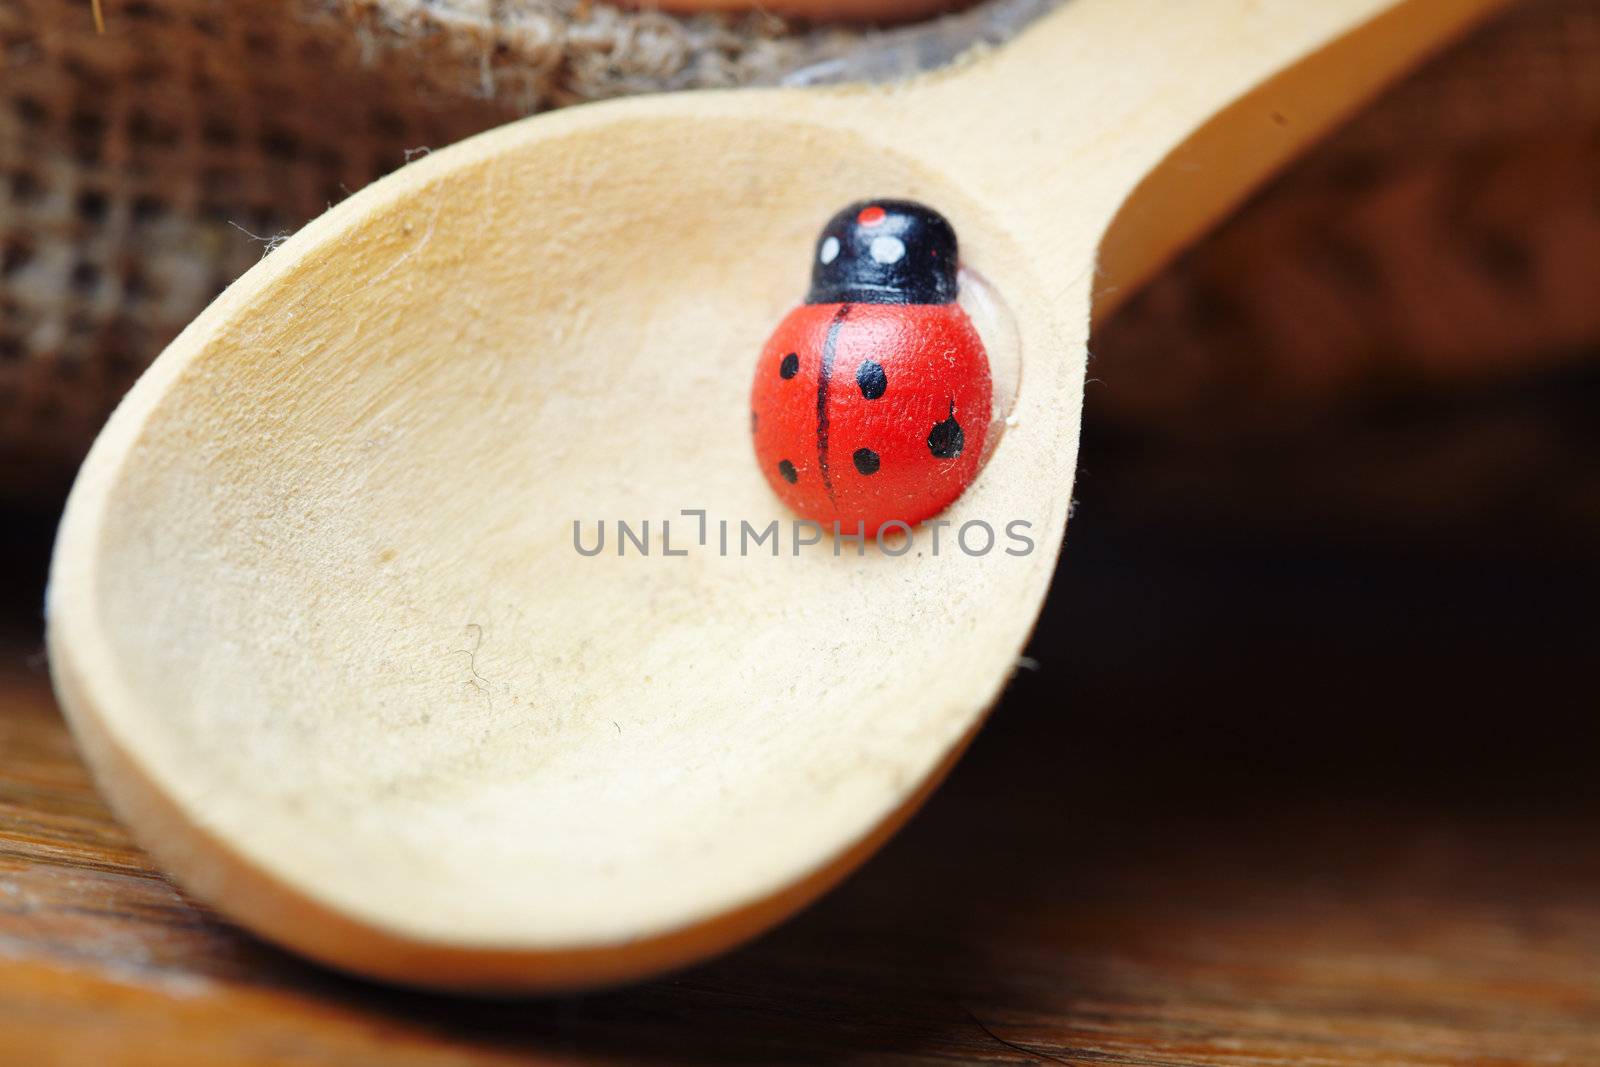 Ladybird on the wooden spoon. Close-up photo with shallow depth of field. Natural light and colors